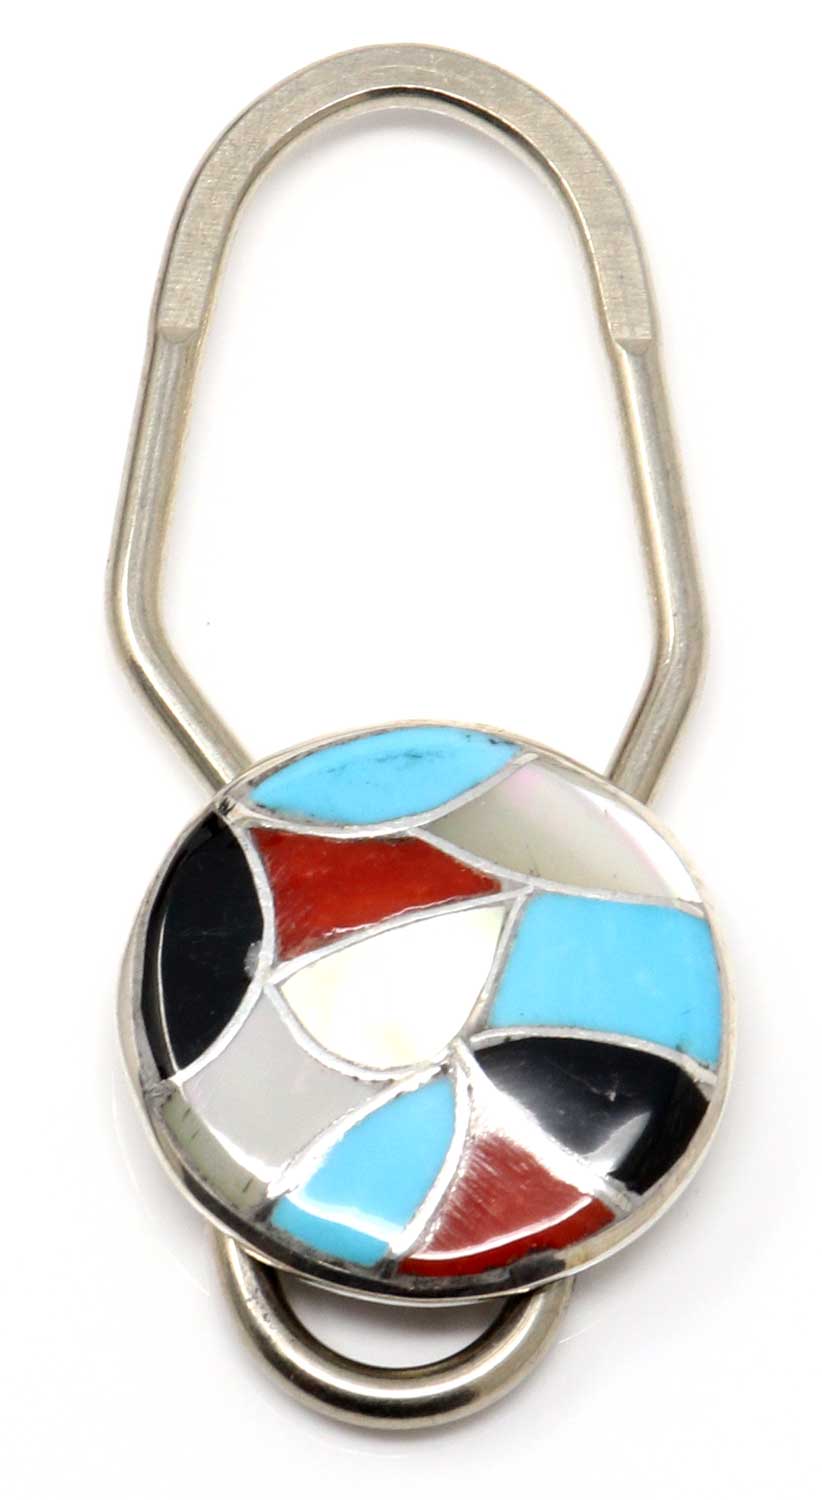 Load image into Gallery viewer, Zuni Multi-Color Inlaid Key Ring by Leekya
